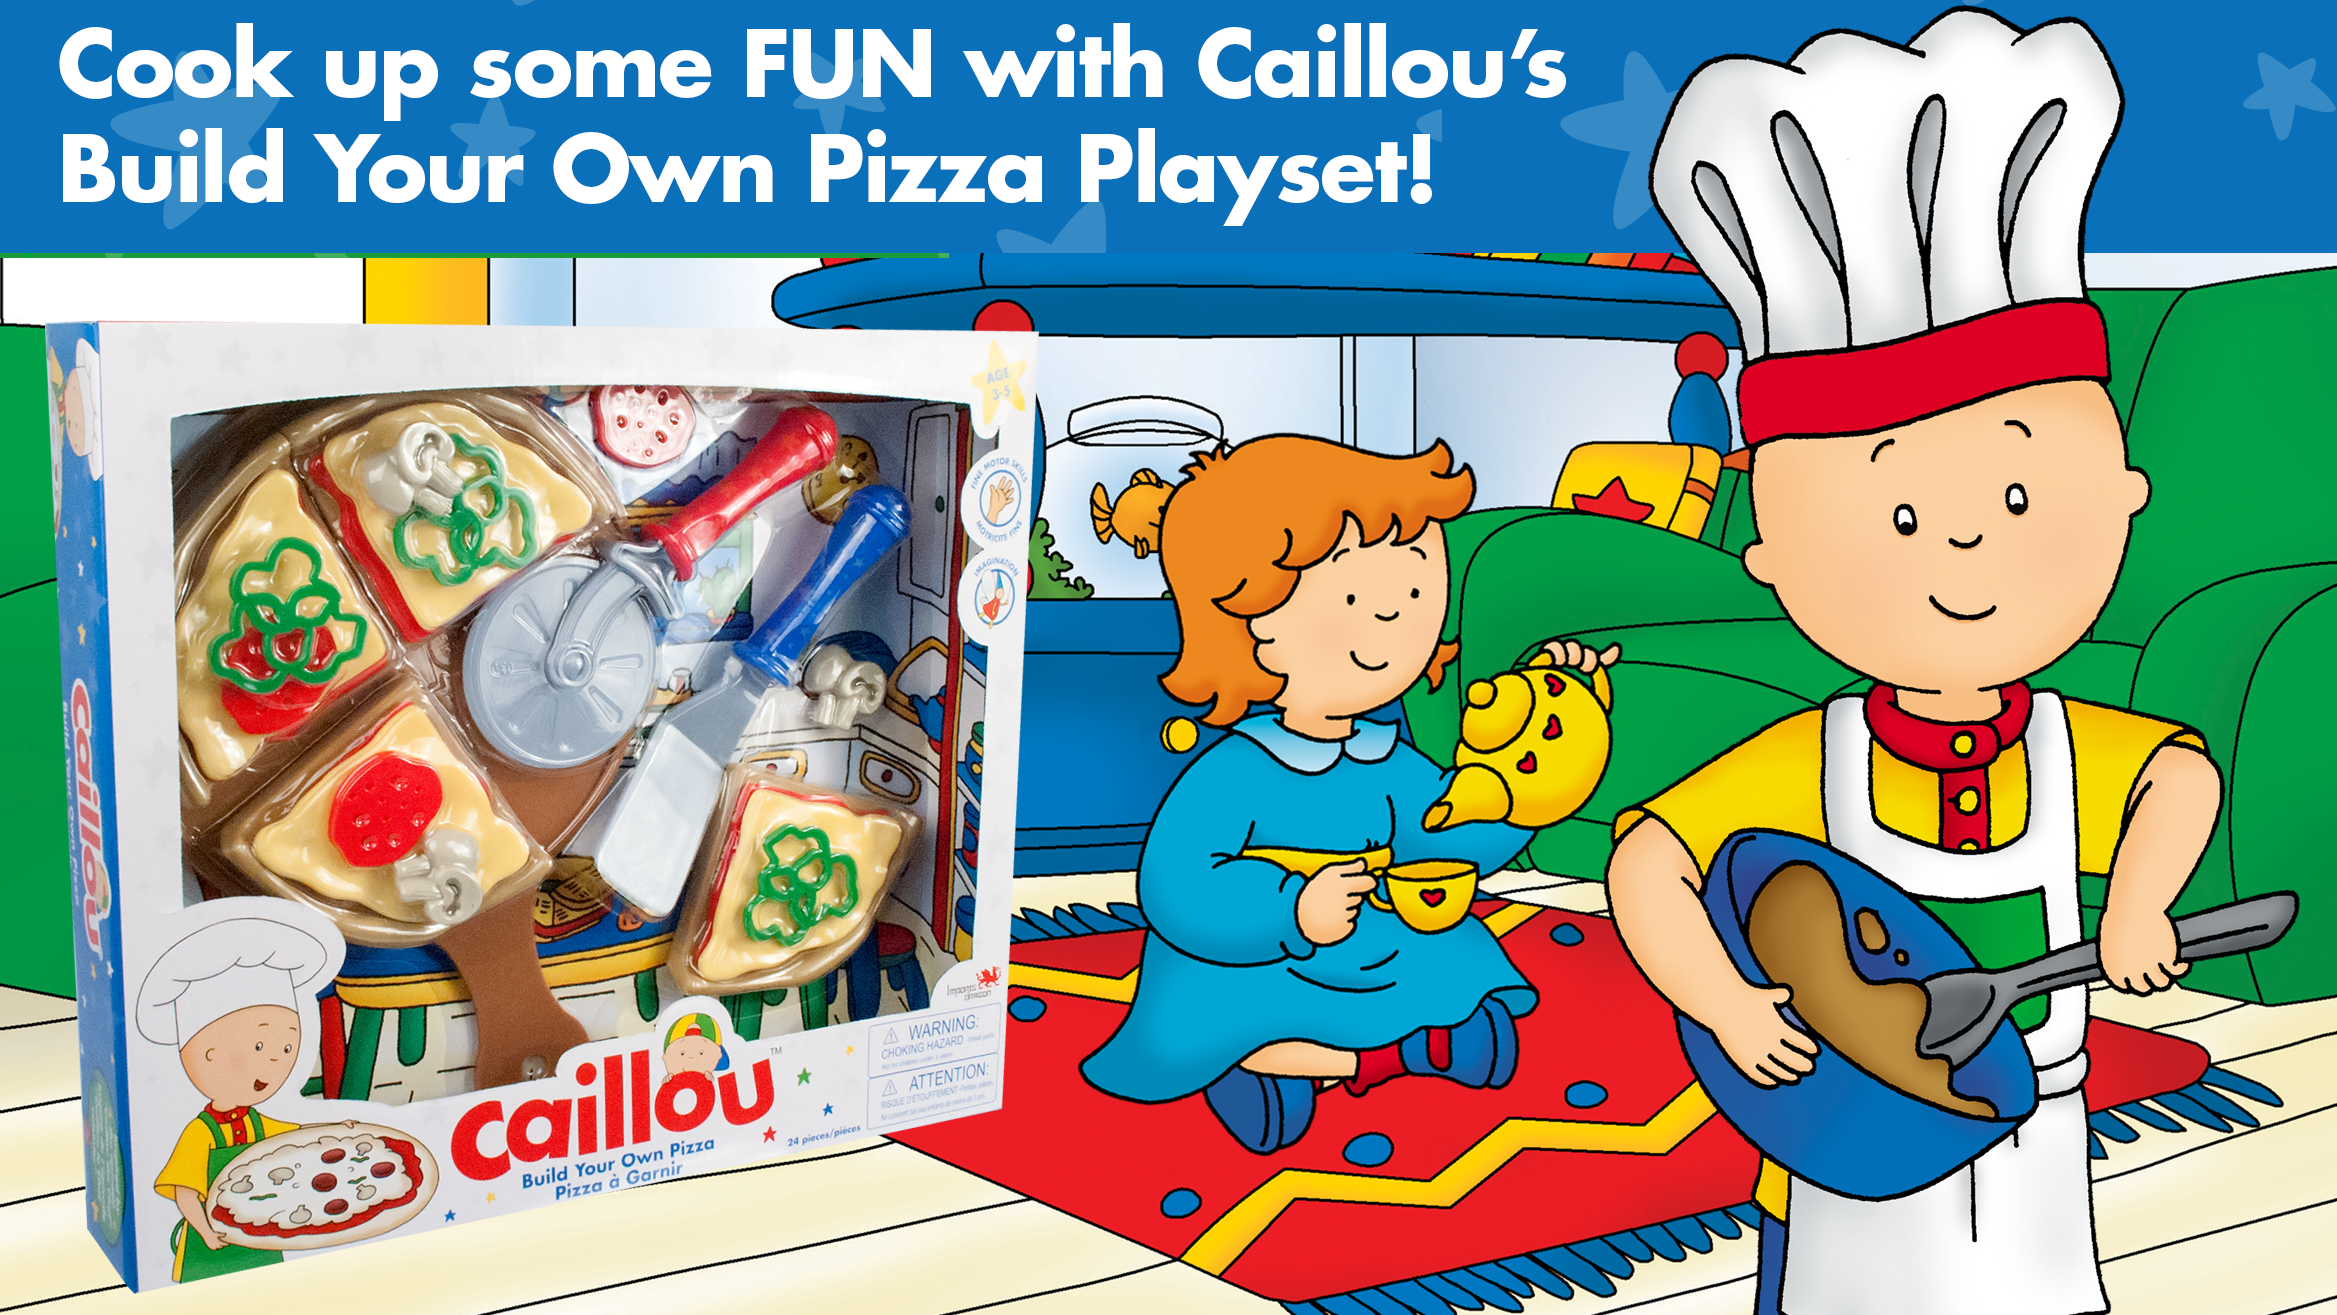 A plastic 'Build Your Own Pizza' activity for kids, inside a clear box packaging with an image of a young chef.